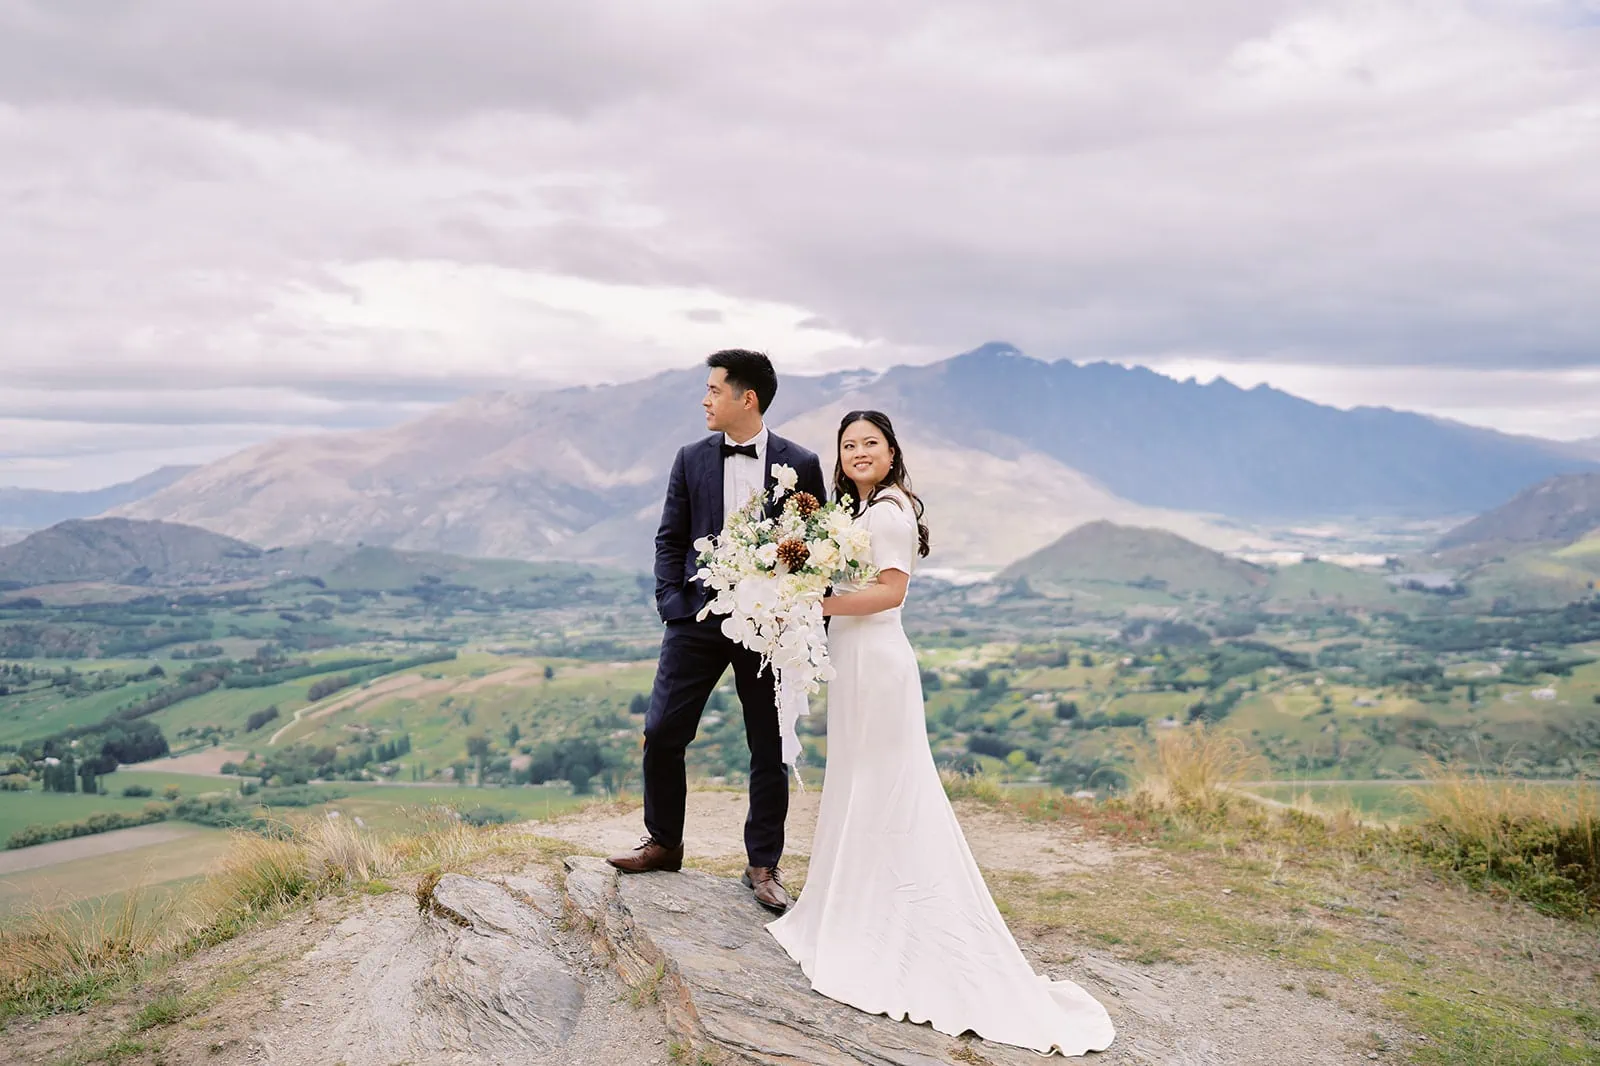 Queenstown Elopement Heli Wedding Photographer クイーンズタウン結婚式 | A bride and groom enjoying a pre-wedding photoshoot on top of a picturesque mountain in New Zealand.